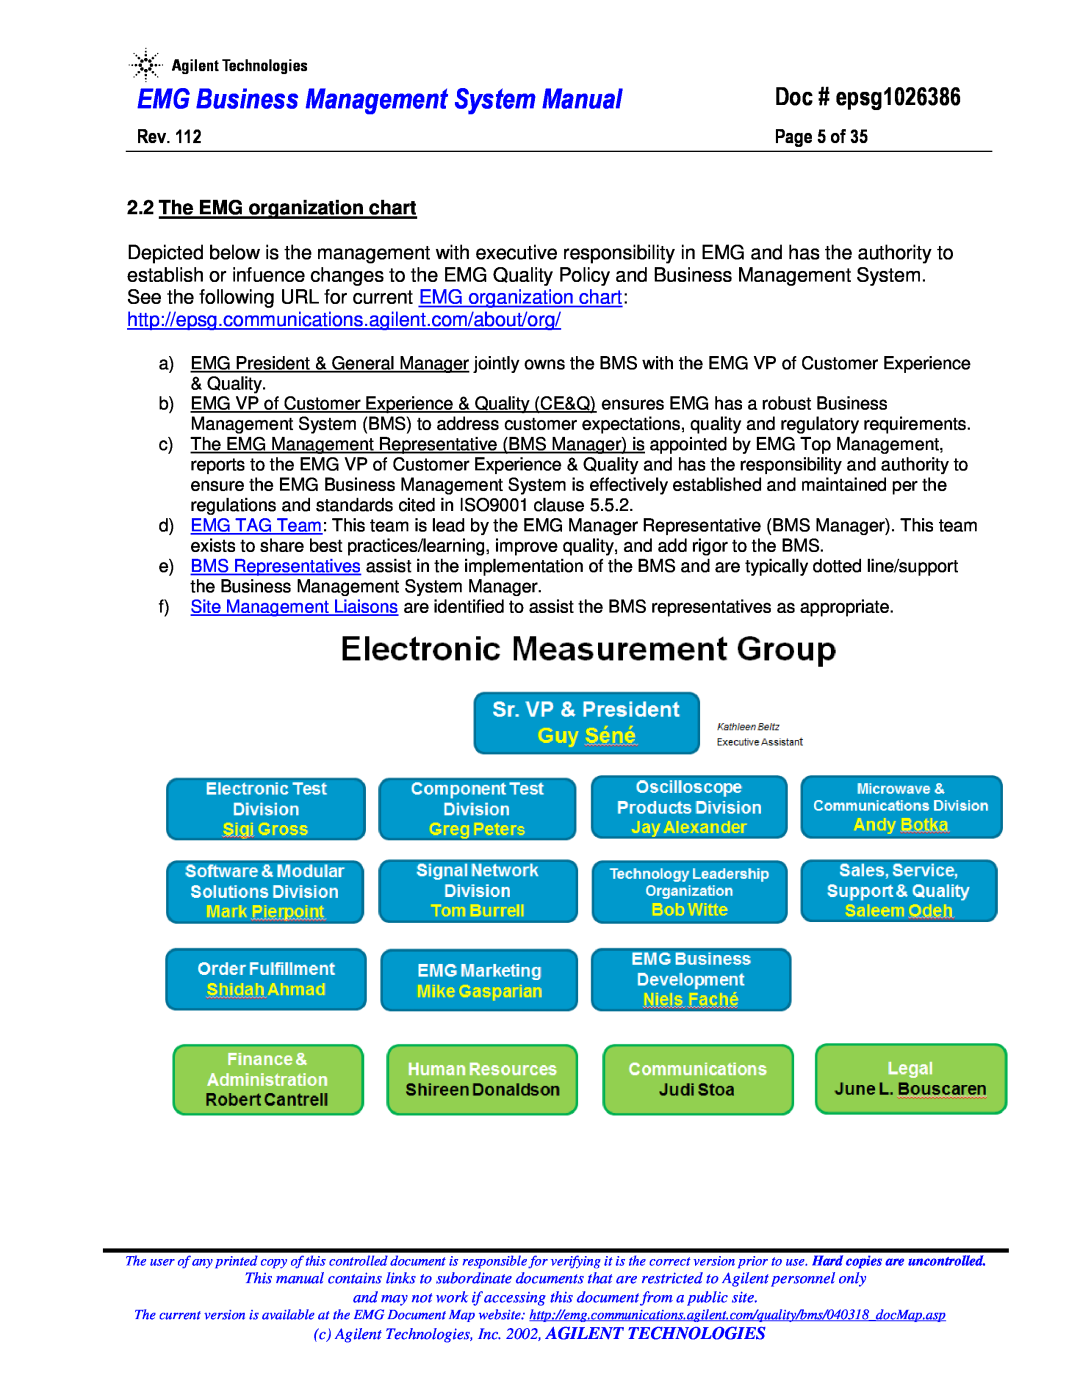 Agilent Technologies epsg1026386 system manual Page 5 of, The EMG organization chart, EMG Business Management System Manual 